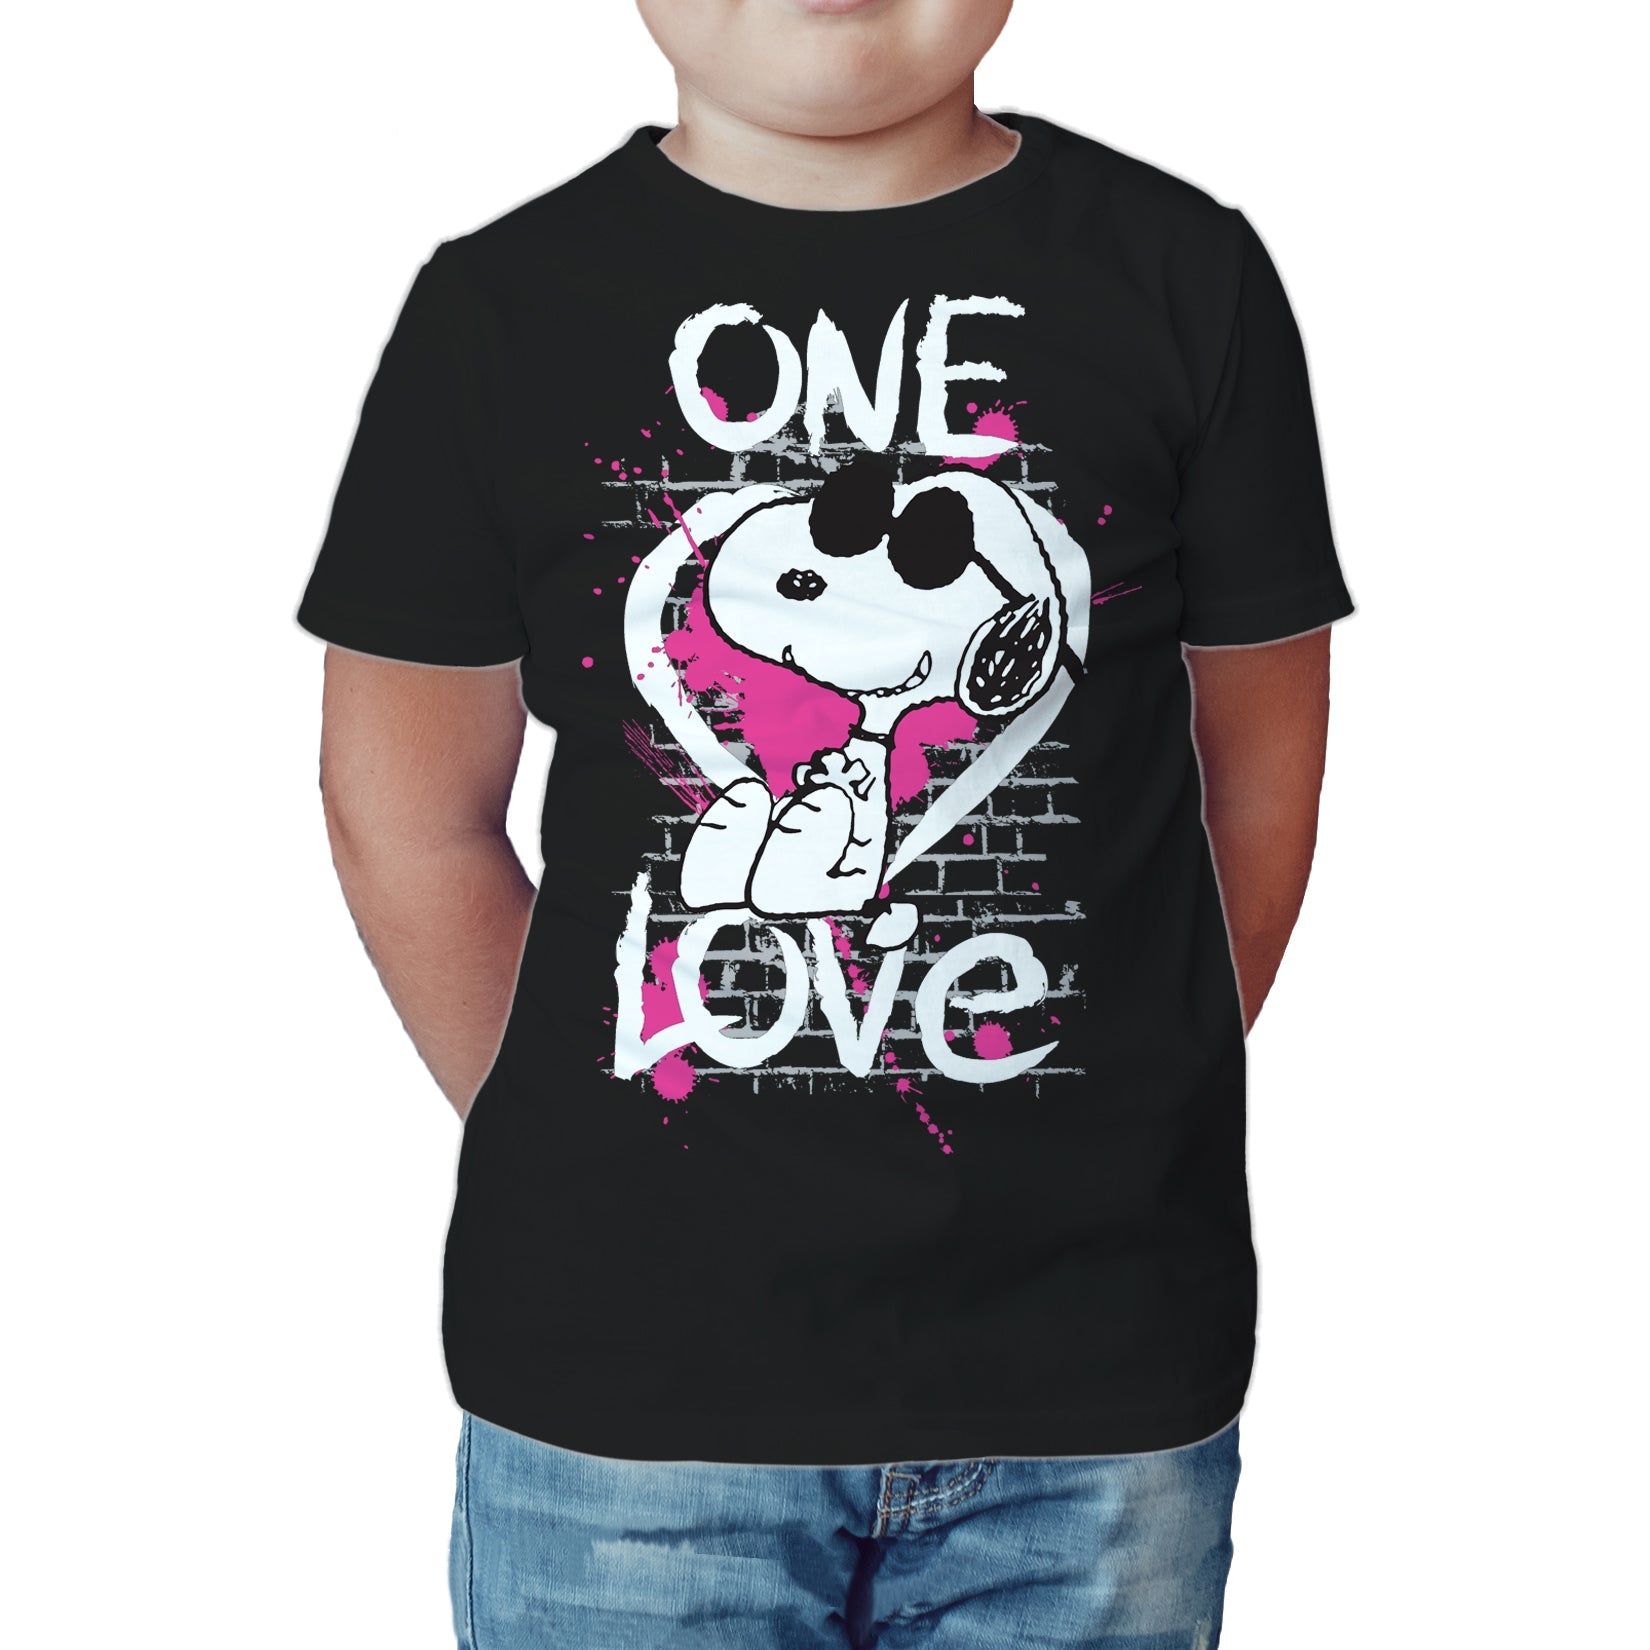 Peanuts Kids Snoopy Graphic One Love Official Kid's T-Shirt